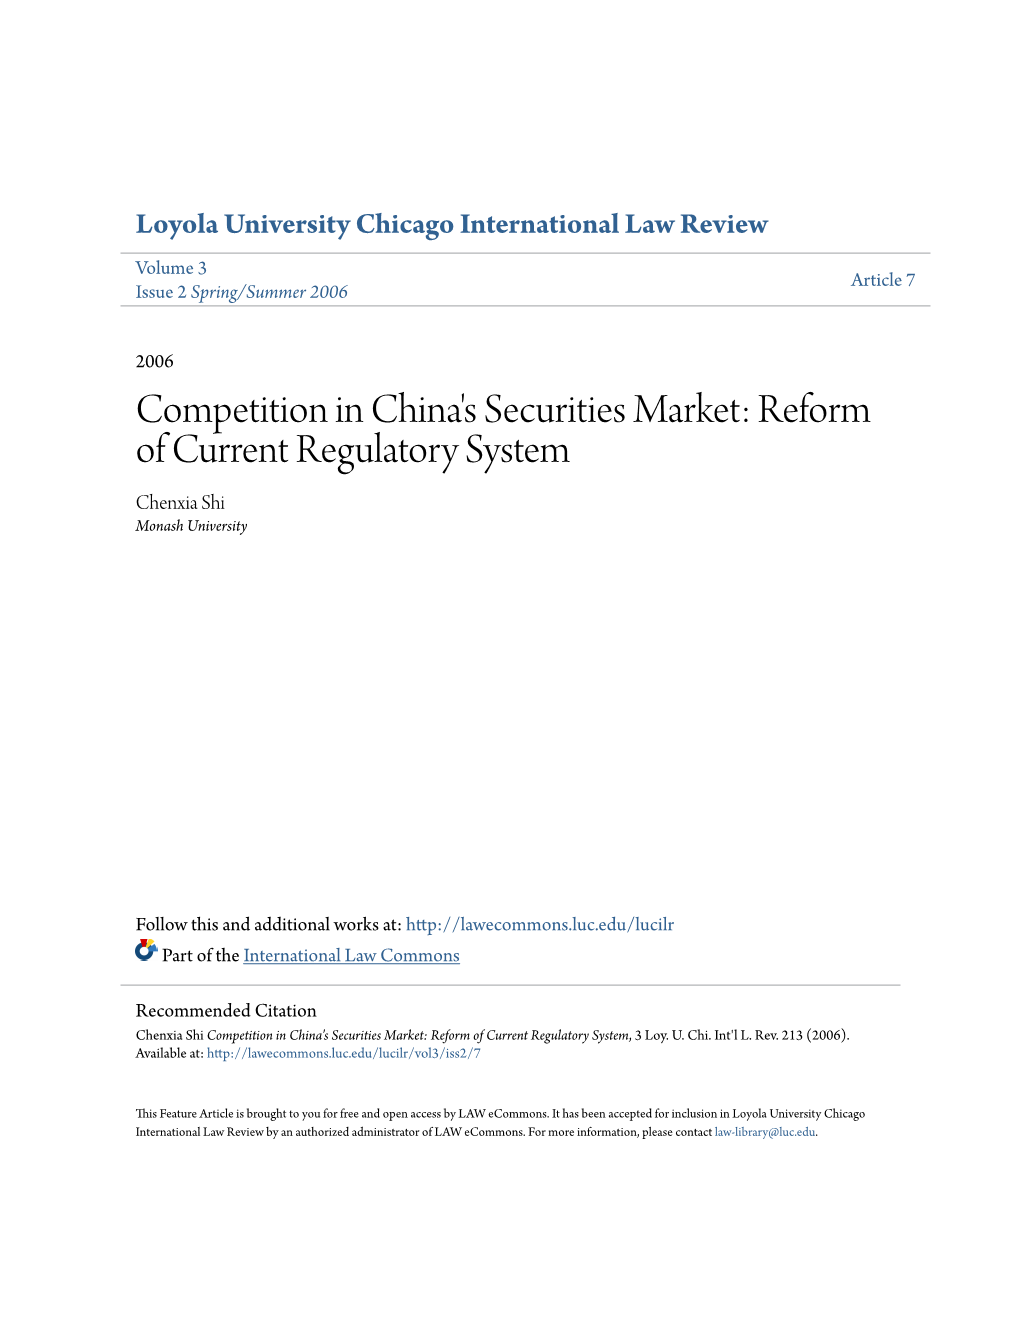 Competition in China's Securities Market: Reform of Current Regulatory System Chenxia Shi Monash University